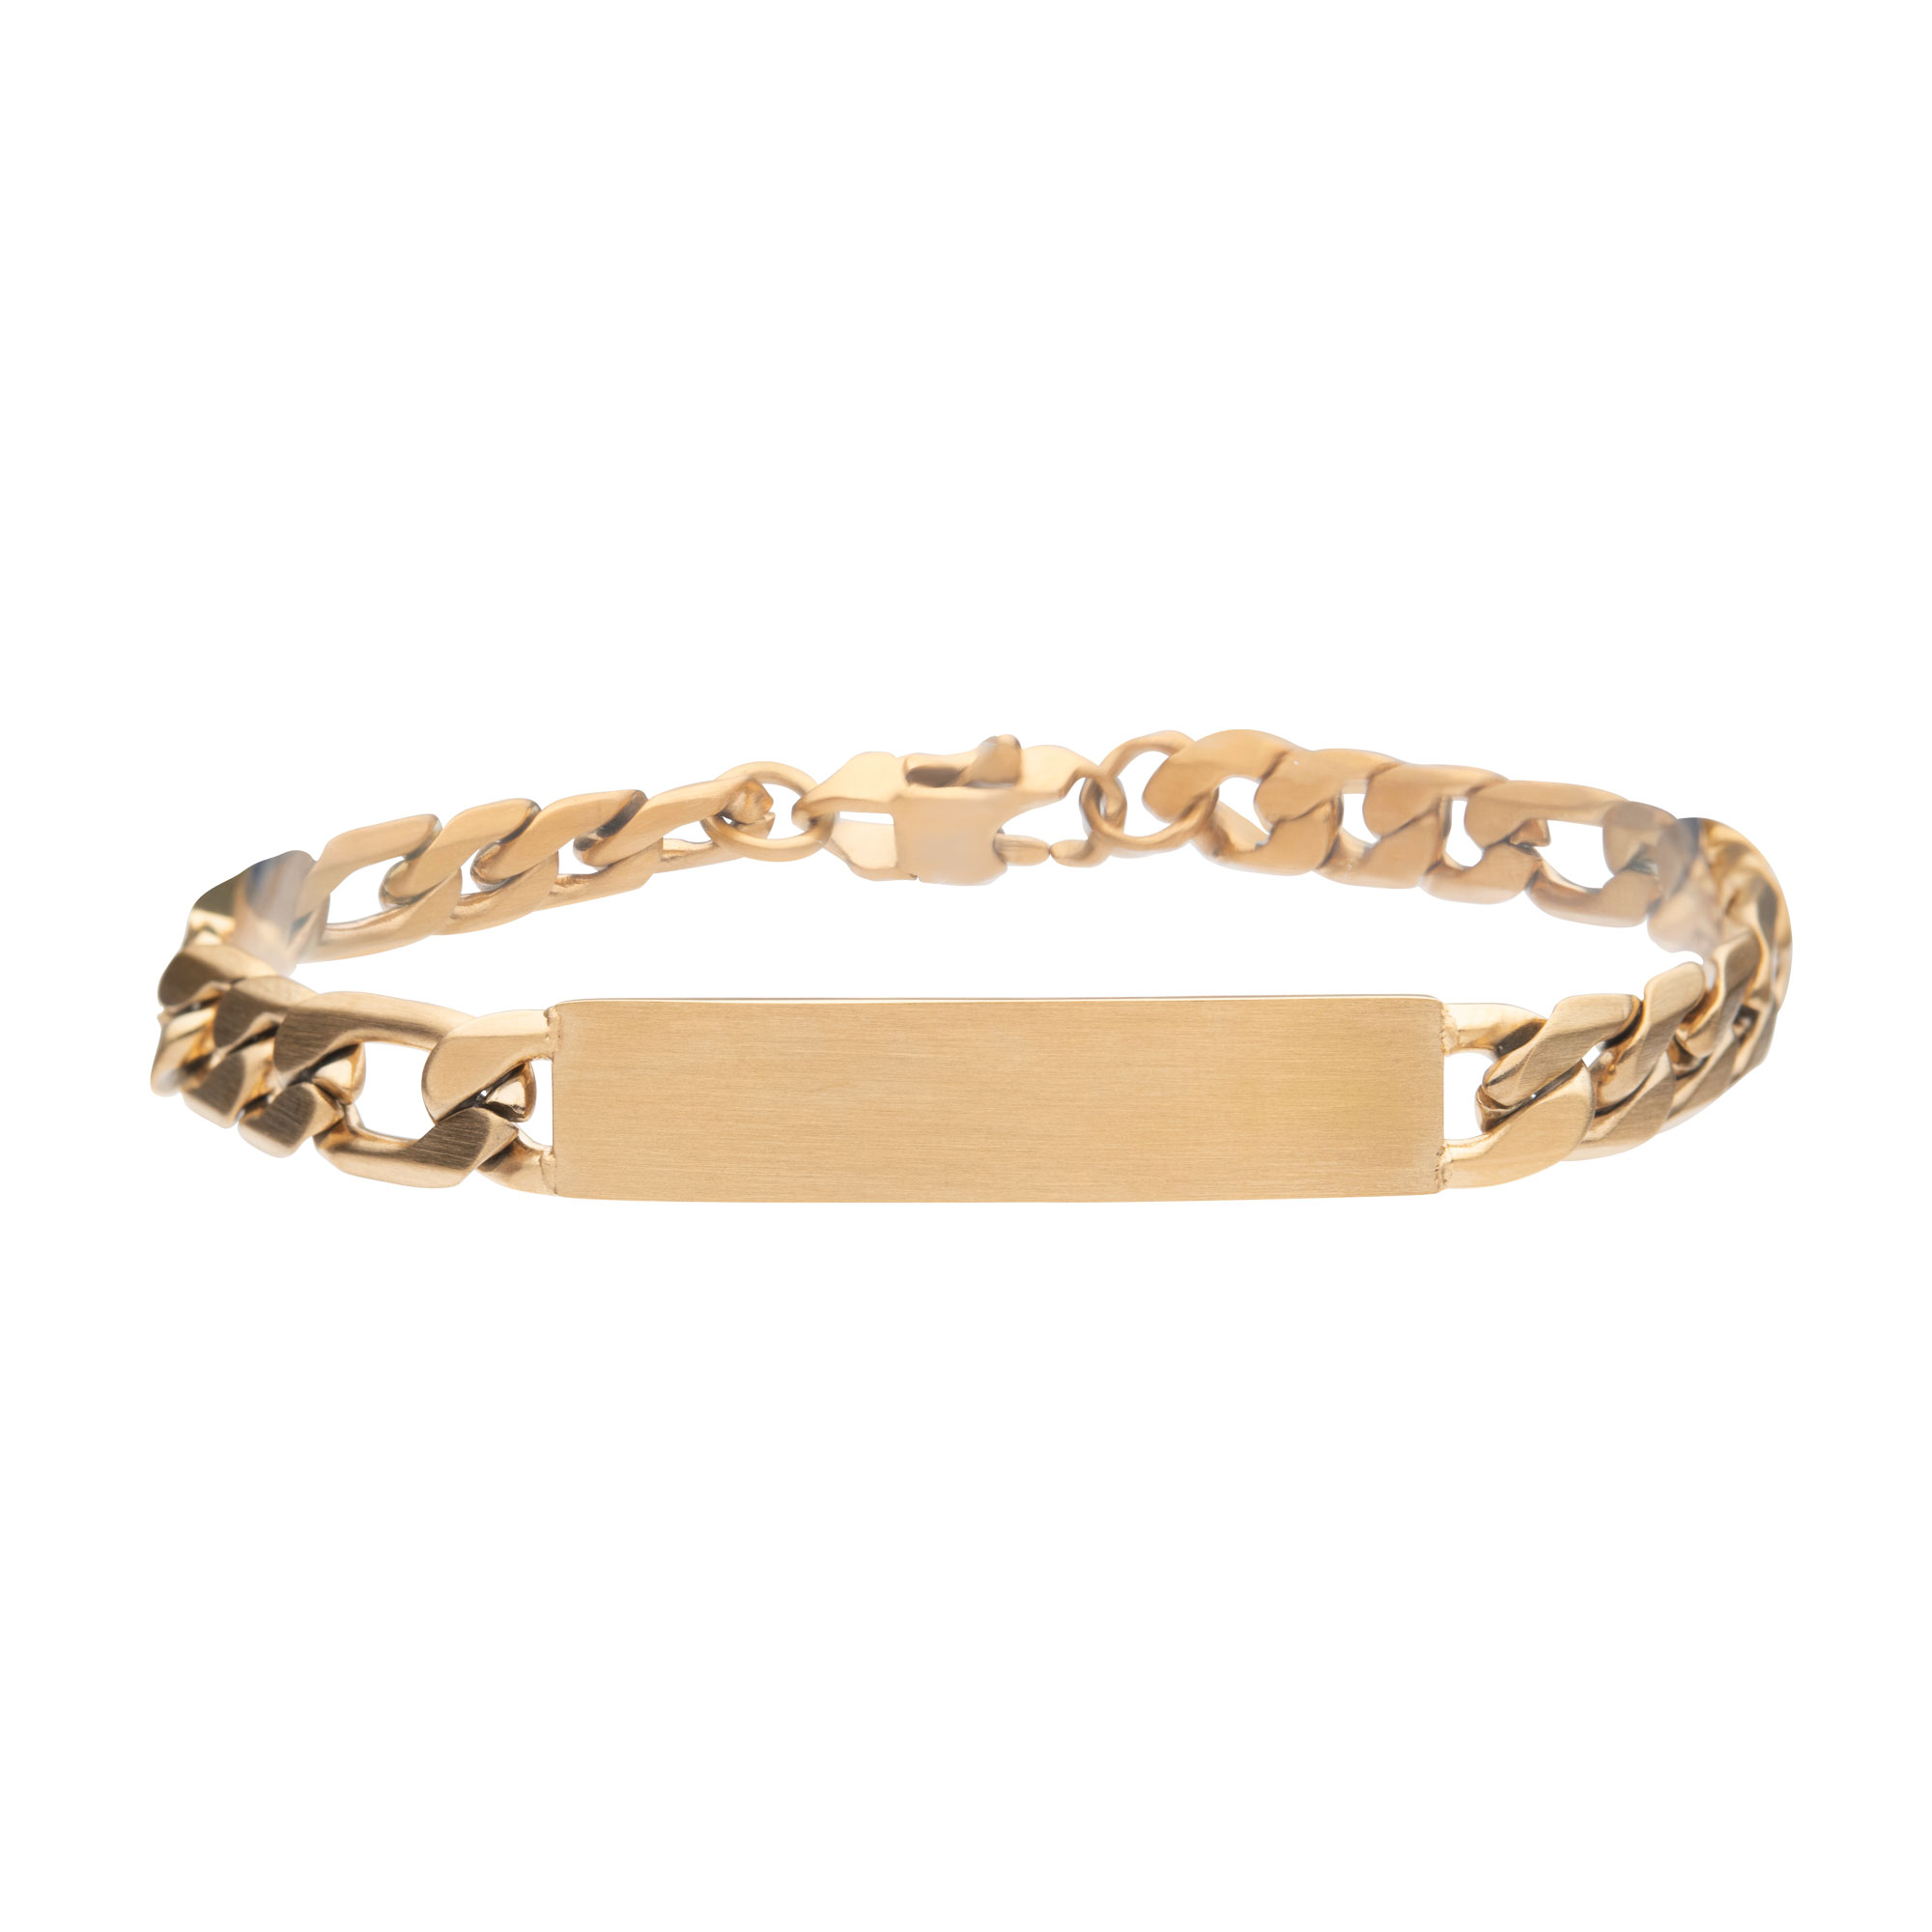 18K Gold IP Engravable Double ID Plate with Curb Chain Bracelet Lewis Jewelers, Inc. Ansonia, CT